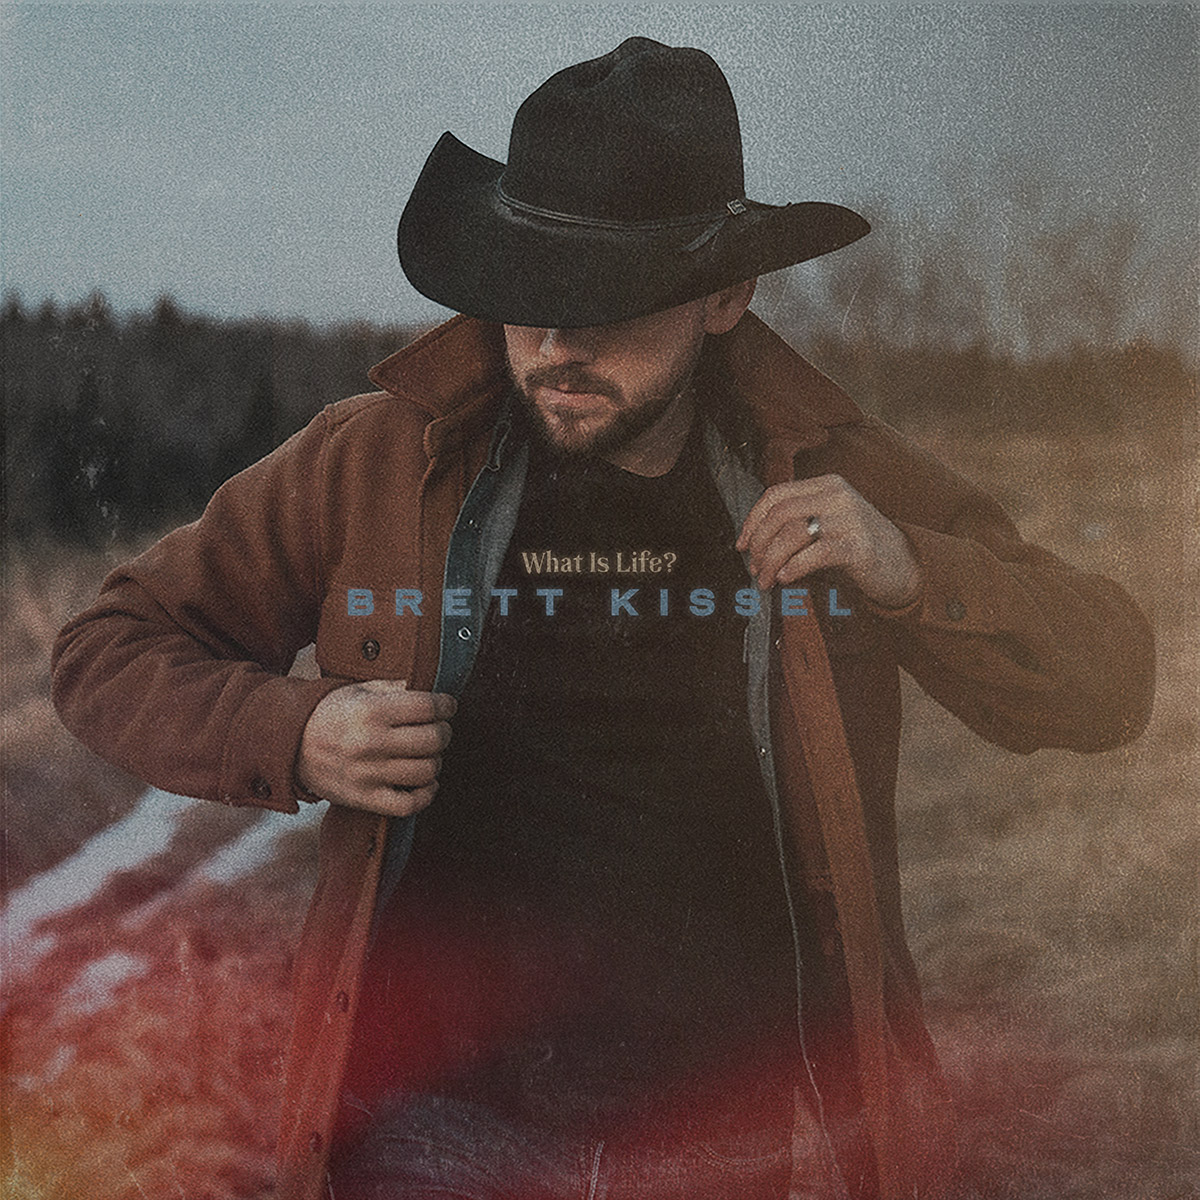 Brett Kissel Tackles The Question ‘What Is Life?’ On New Album, Out April 9